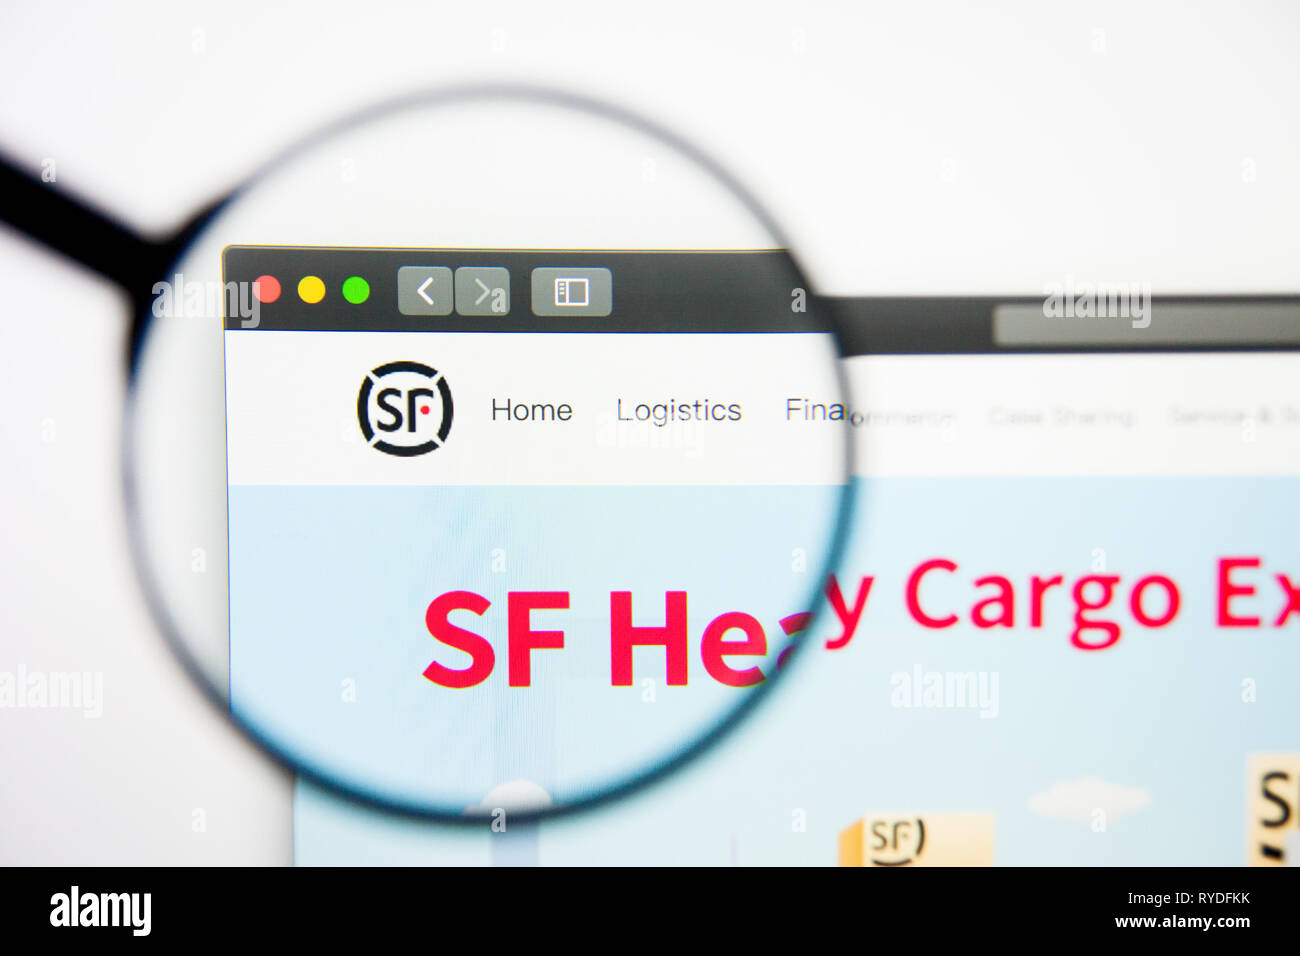 Los Angeles, California, USA - 28 February 2019: S.F. Holding website homepage. S.F. Holding logo visible on display screen, Illustrative Editorial Stock Photo